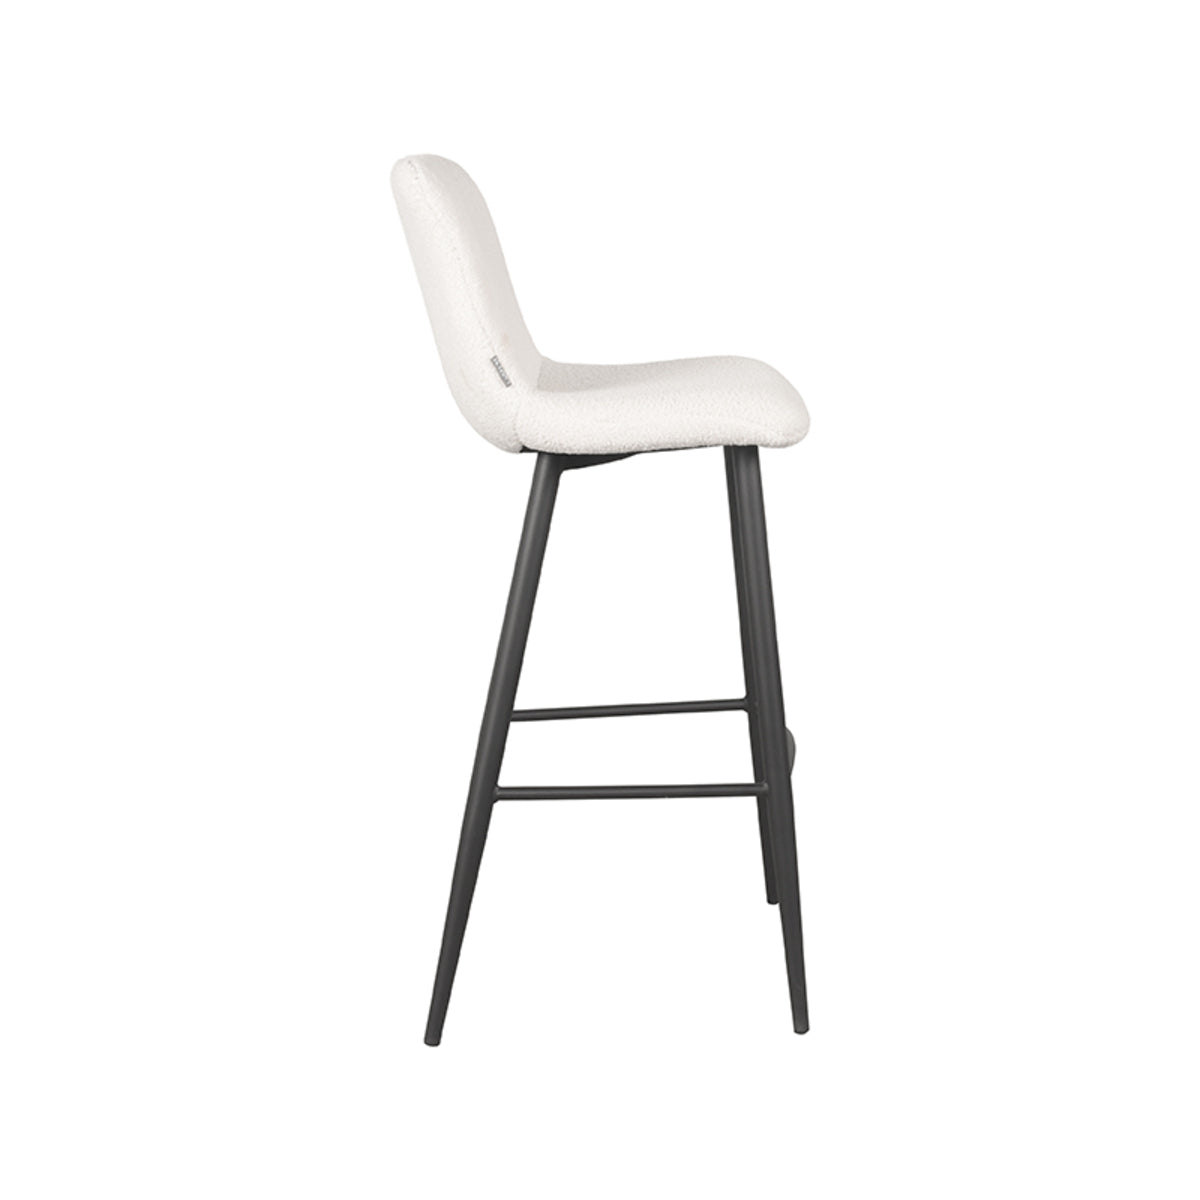 LABEL51 Bar stool Jep - Ivory - Teddy - Seat height 78 | 2 pieces